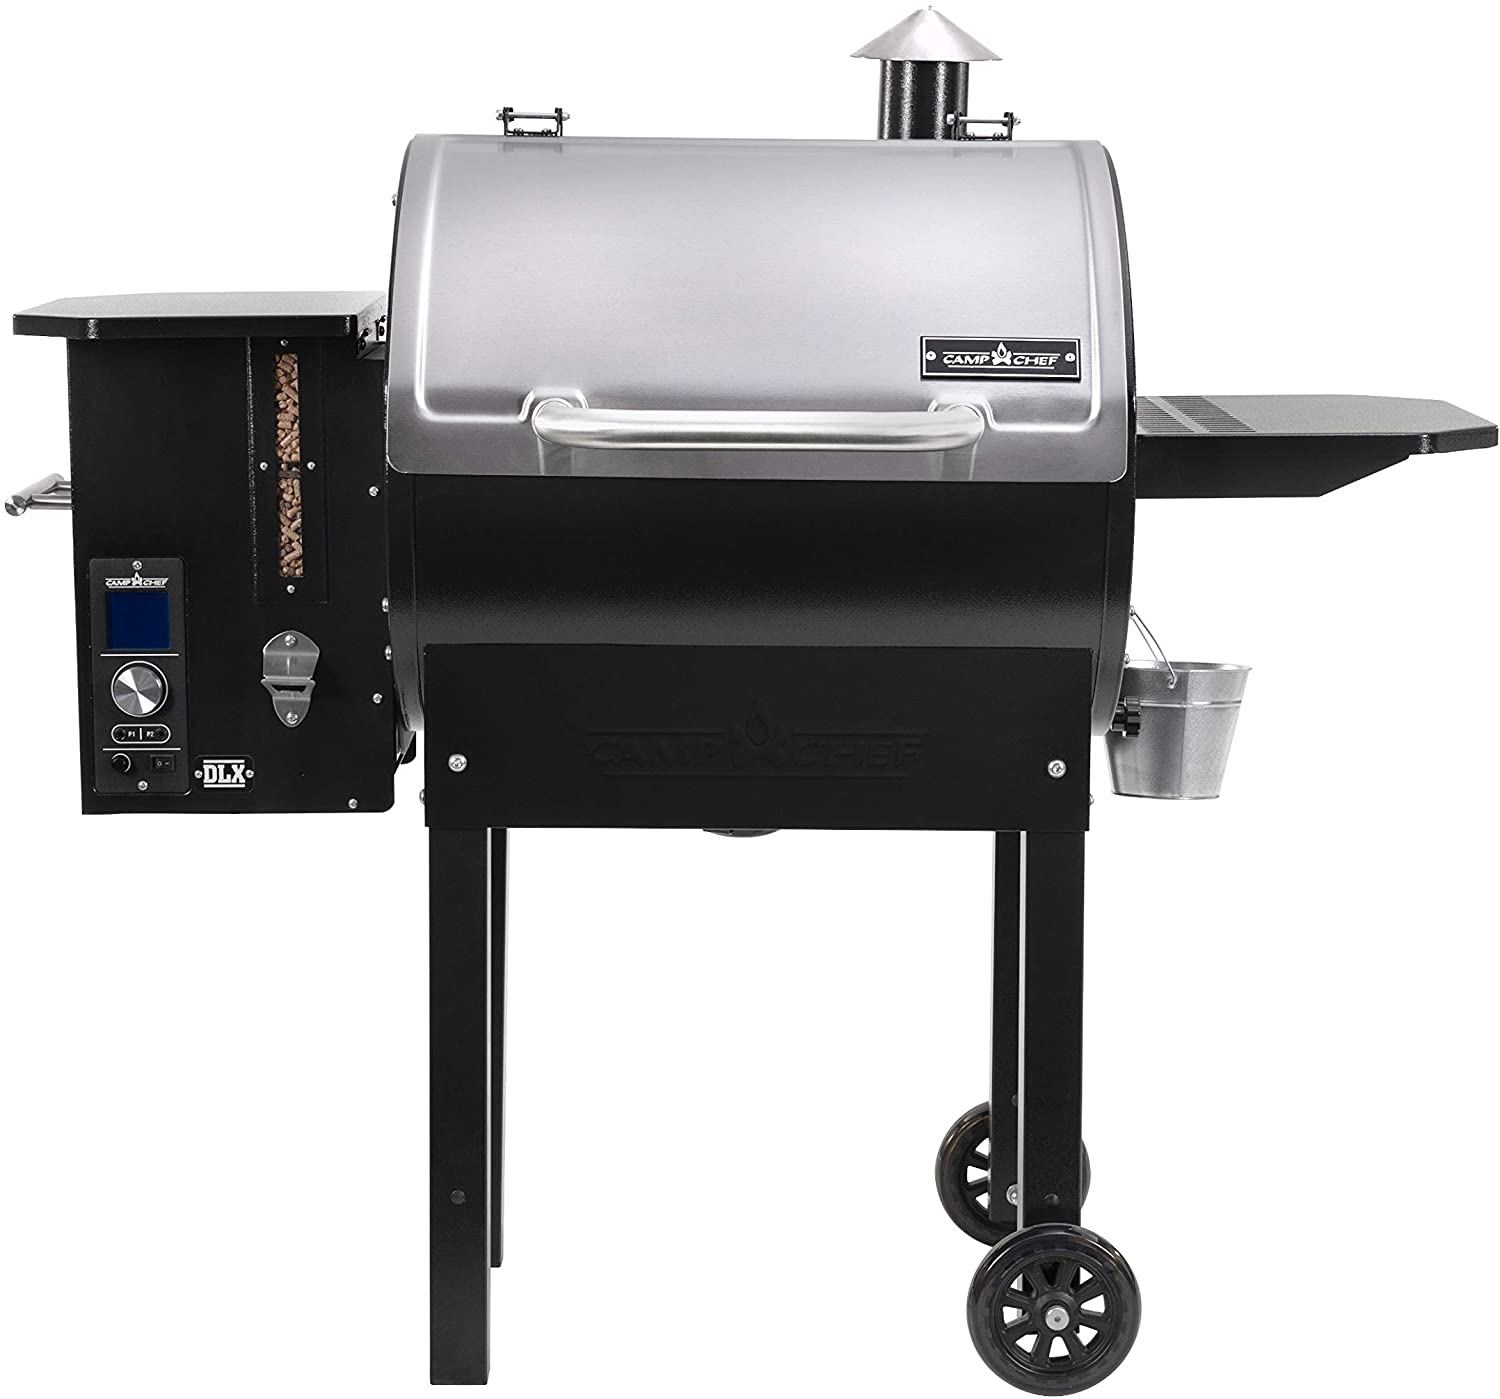 Camp Chef SmokePro DLX Pellet Grill: